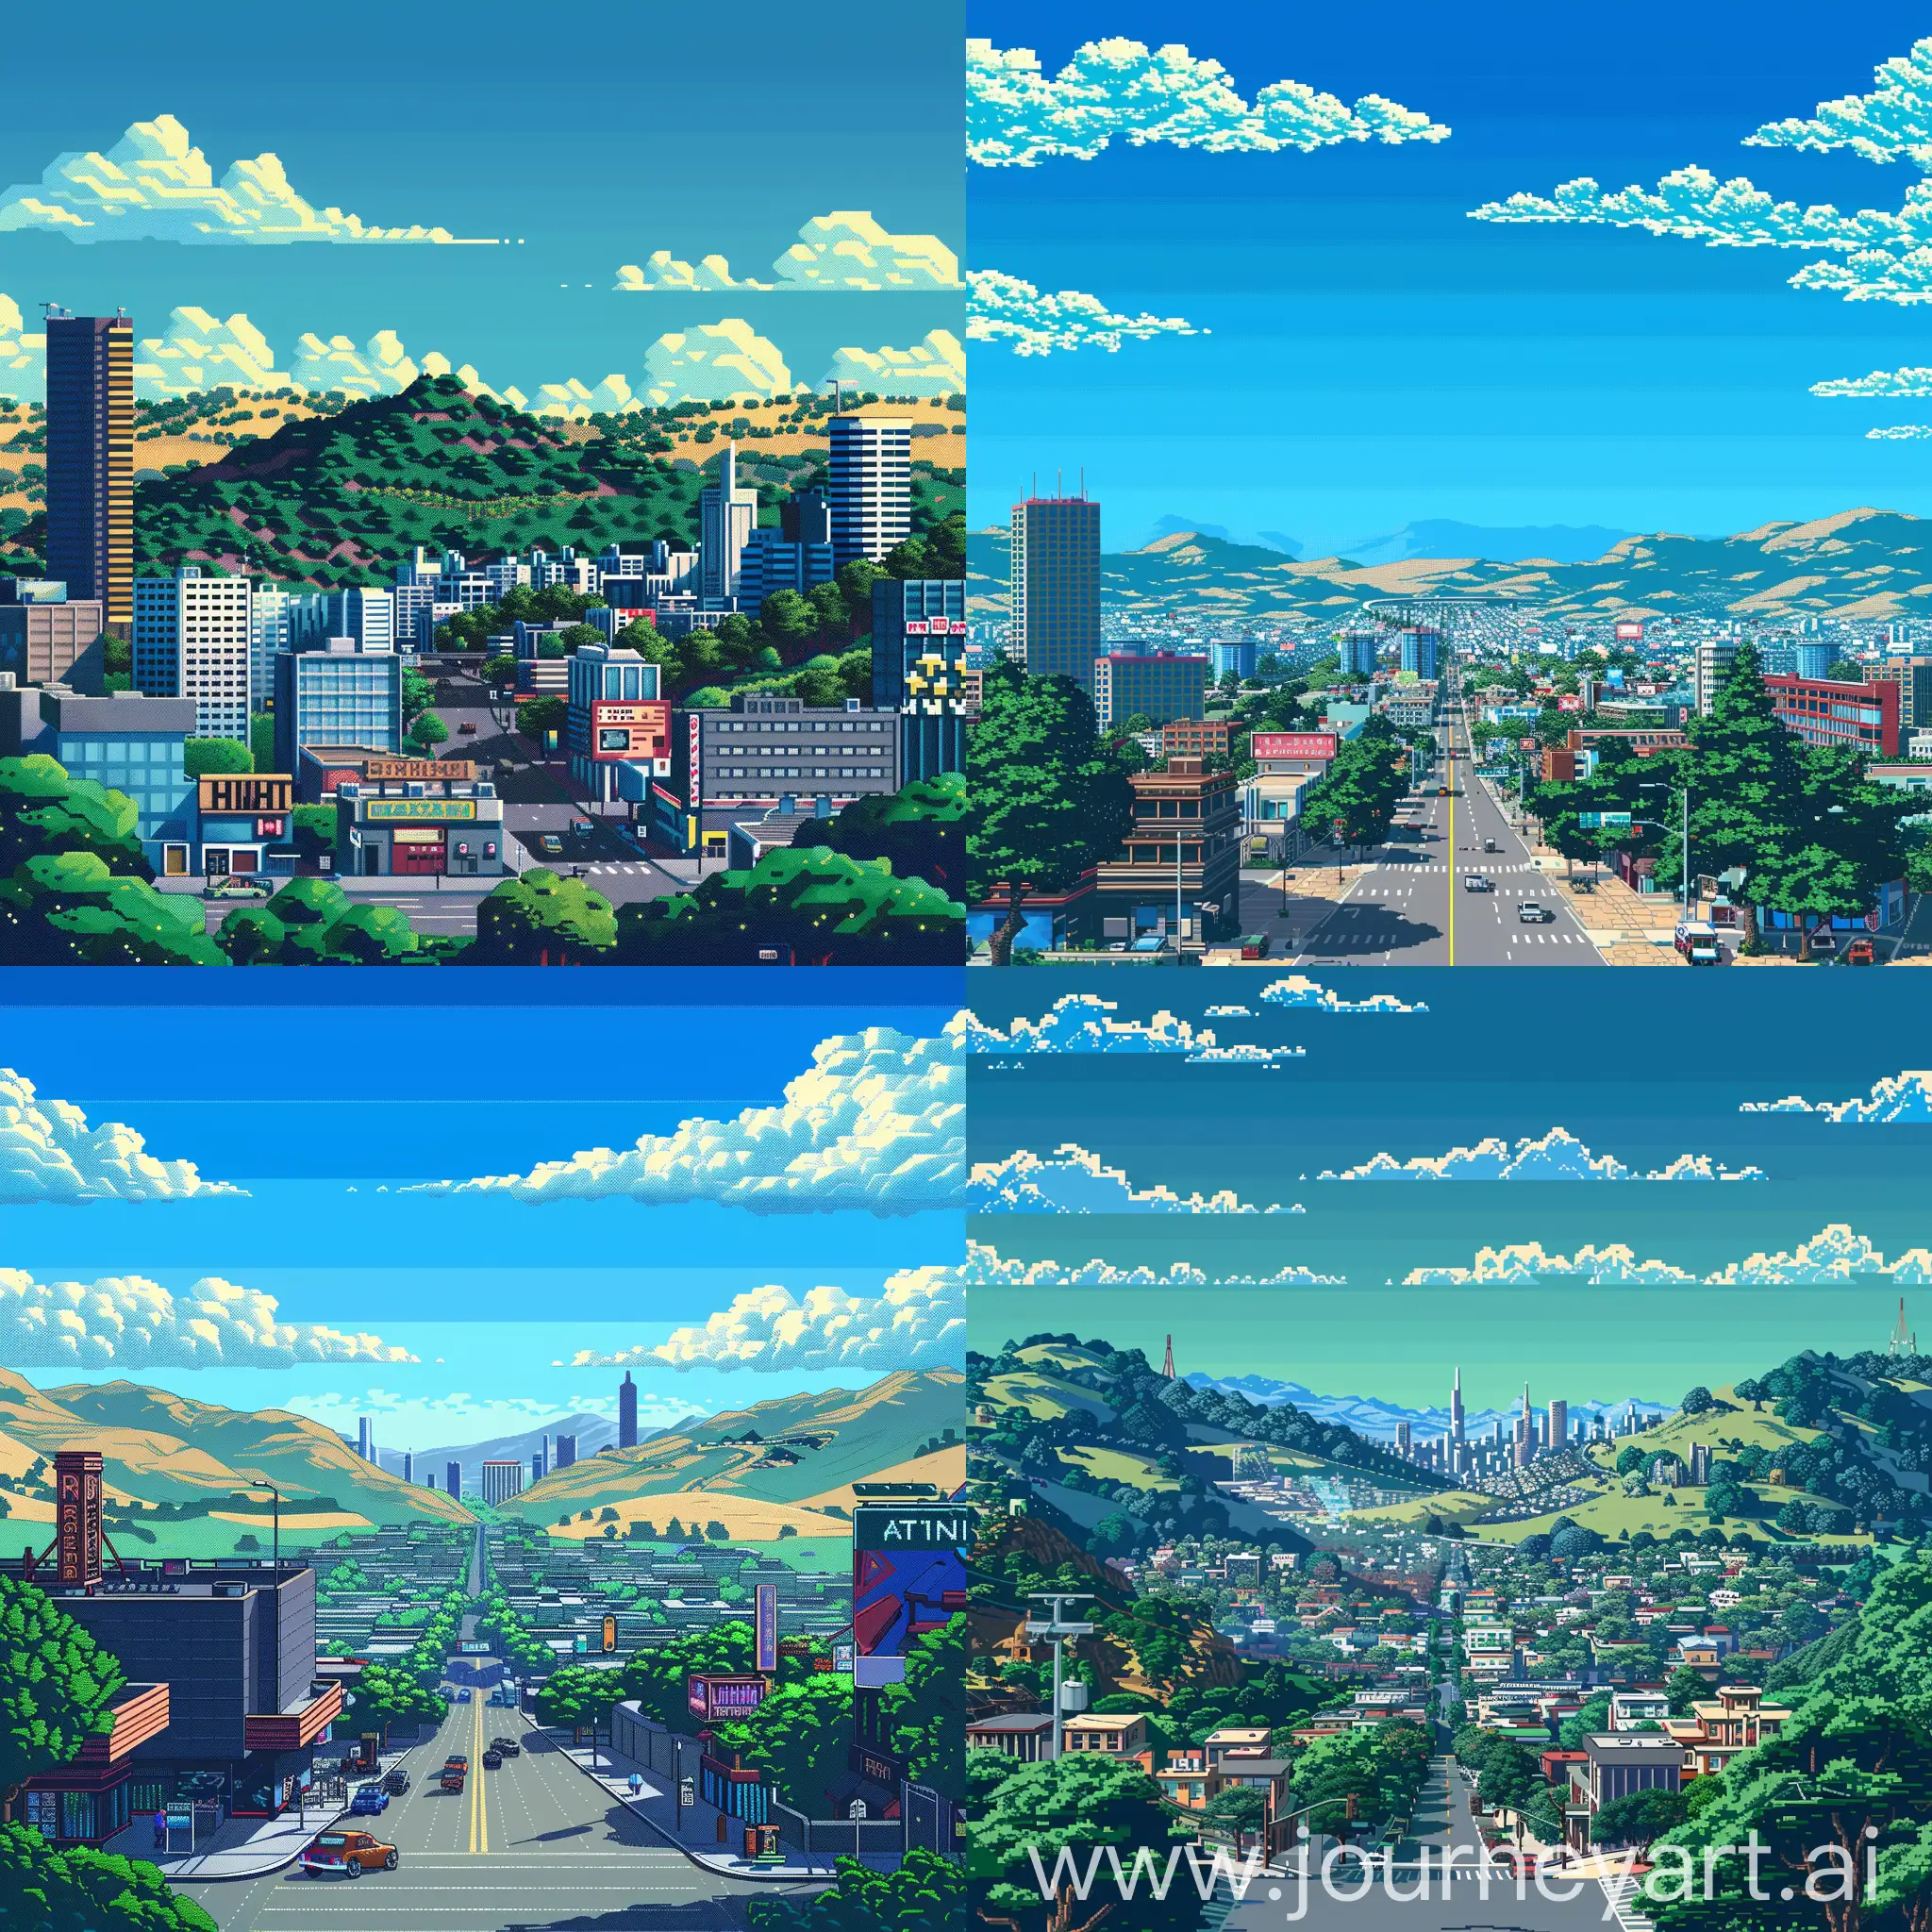 /imagine high tech silicon valley from a 1990s video game, clear blue skies, pixel art style –ar 16:9 –v 5.1